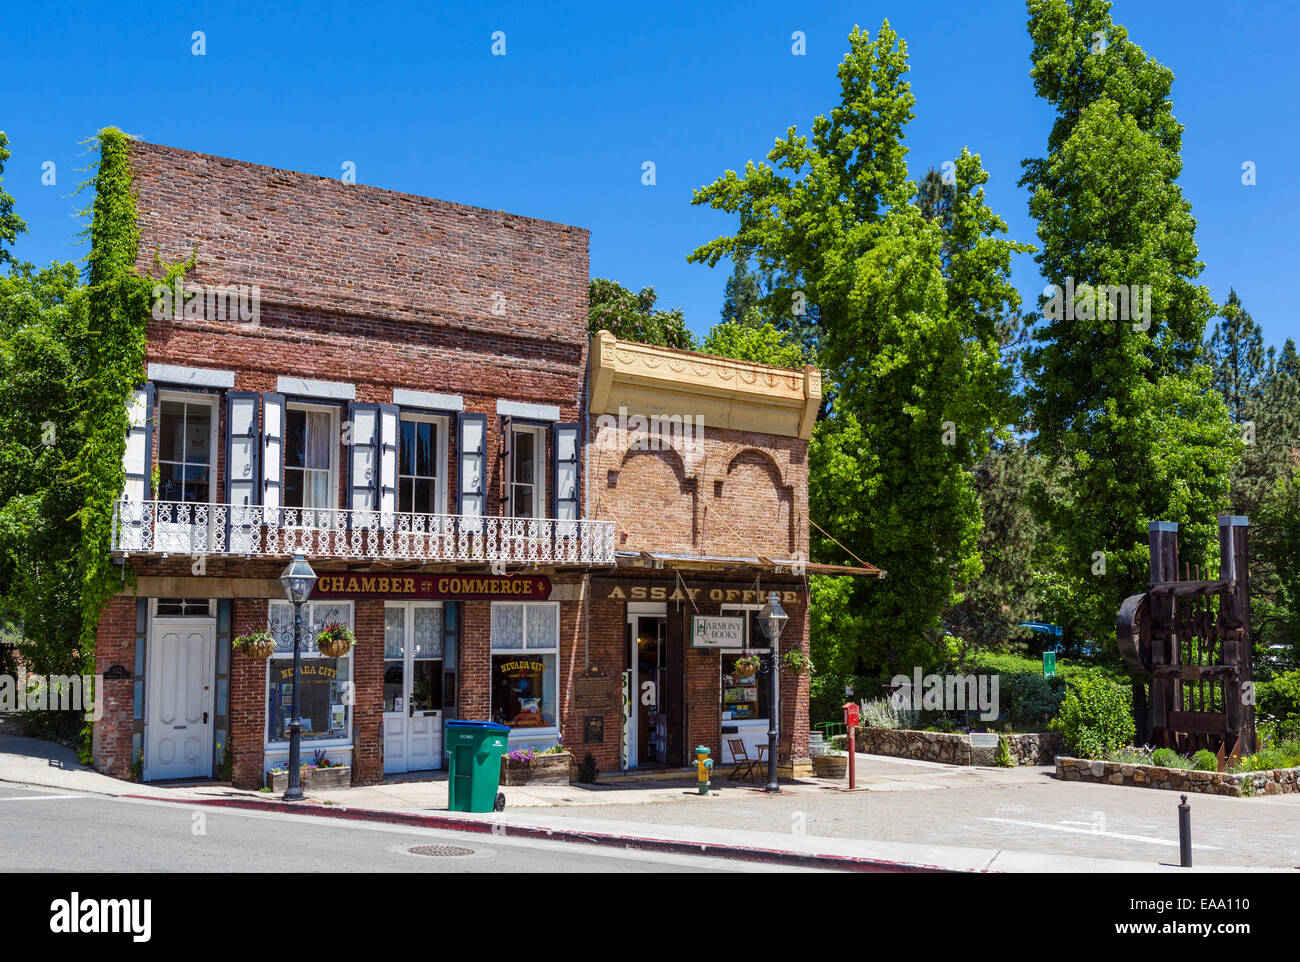 South Yuba Canal Building & Ott’s Assay Office, the oldest business buildings in historic downtown Nevada City, California, USA Stock Photo